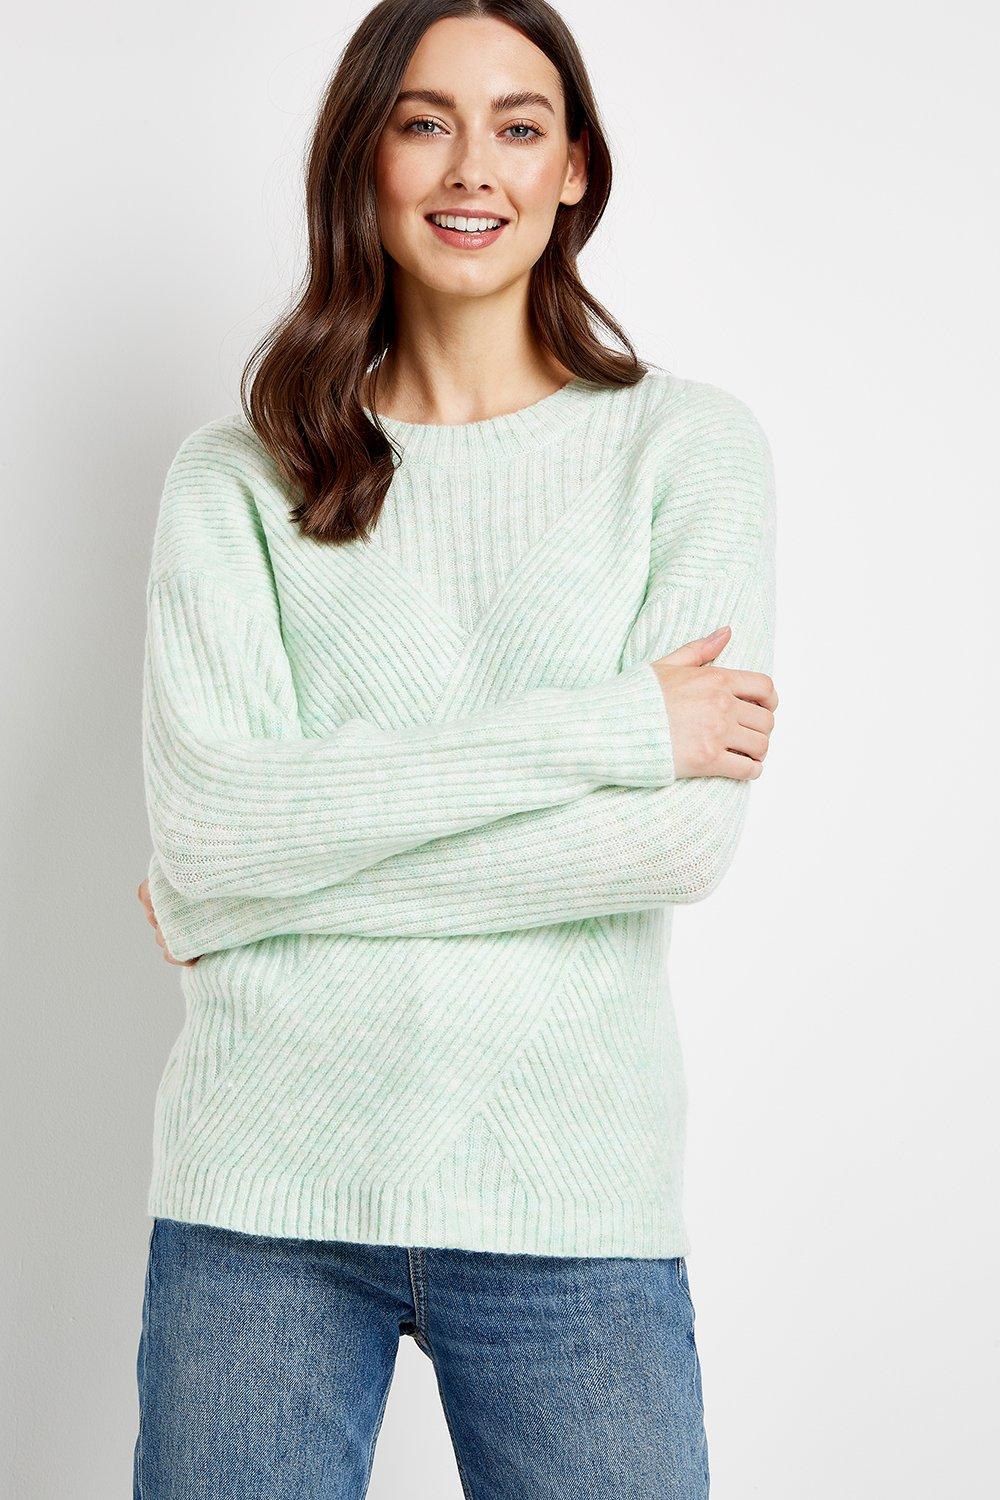 The Versatile Jumper You'Ll Be Wearing On-Repeat. A Chic Mint Hue And Ribbed Knit Keep This Cosy Jumper On-Trend, Just Pair With Leather-Look Leggings For Added Style Appeal.&Nbsp;  Jumper Round Neck Long Sleeve Relxaed Casual 75% Acrylic, 25% Polyester.